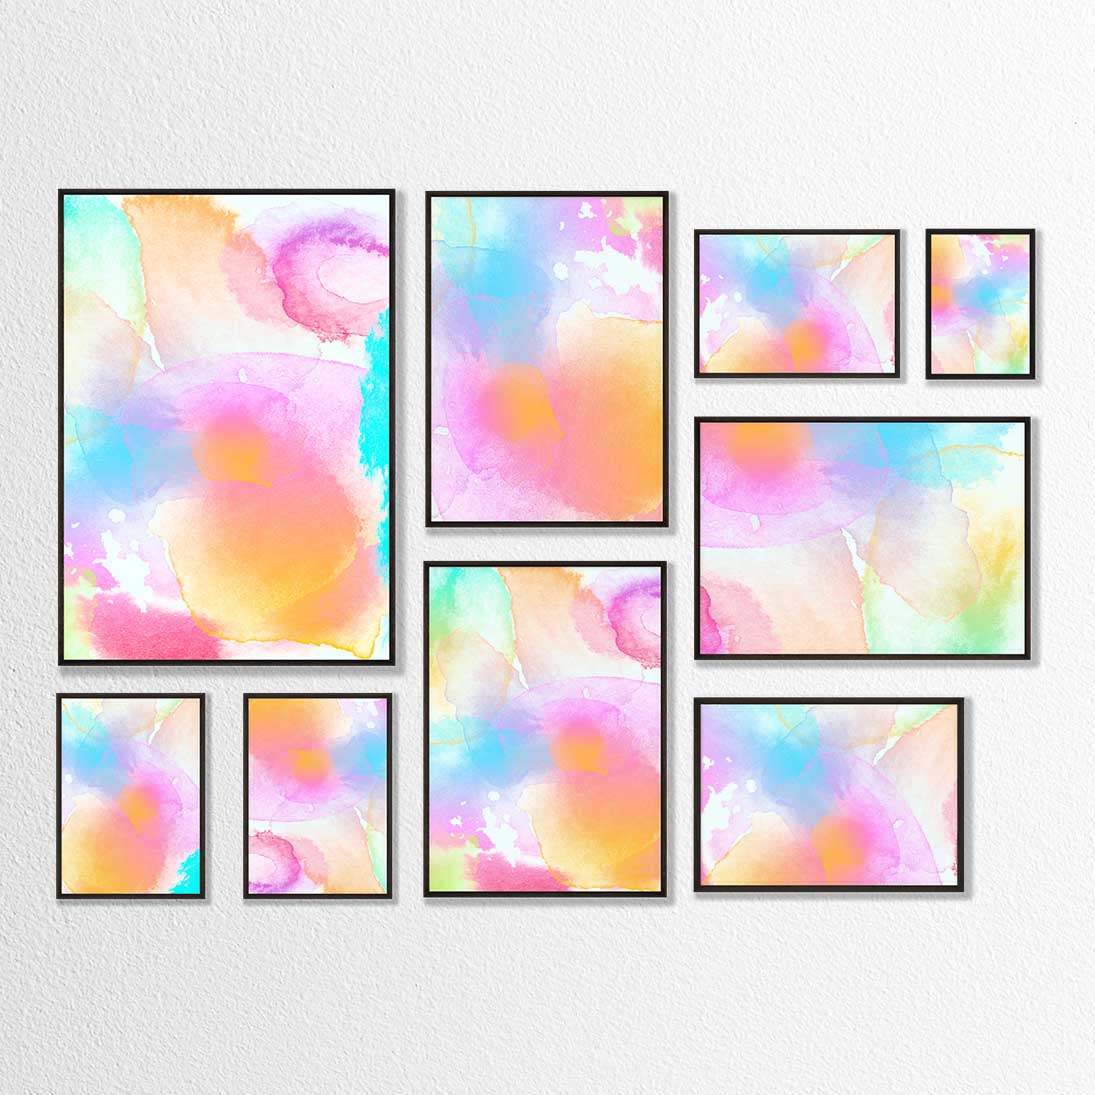 Infuse your home with creativity and vibrancy through Personalised Acid Trip Framed Print. This fine digital art piece boasts a colorful and vivid design that leaves a lasting impression. Printed from your photo